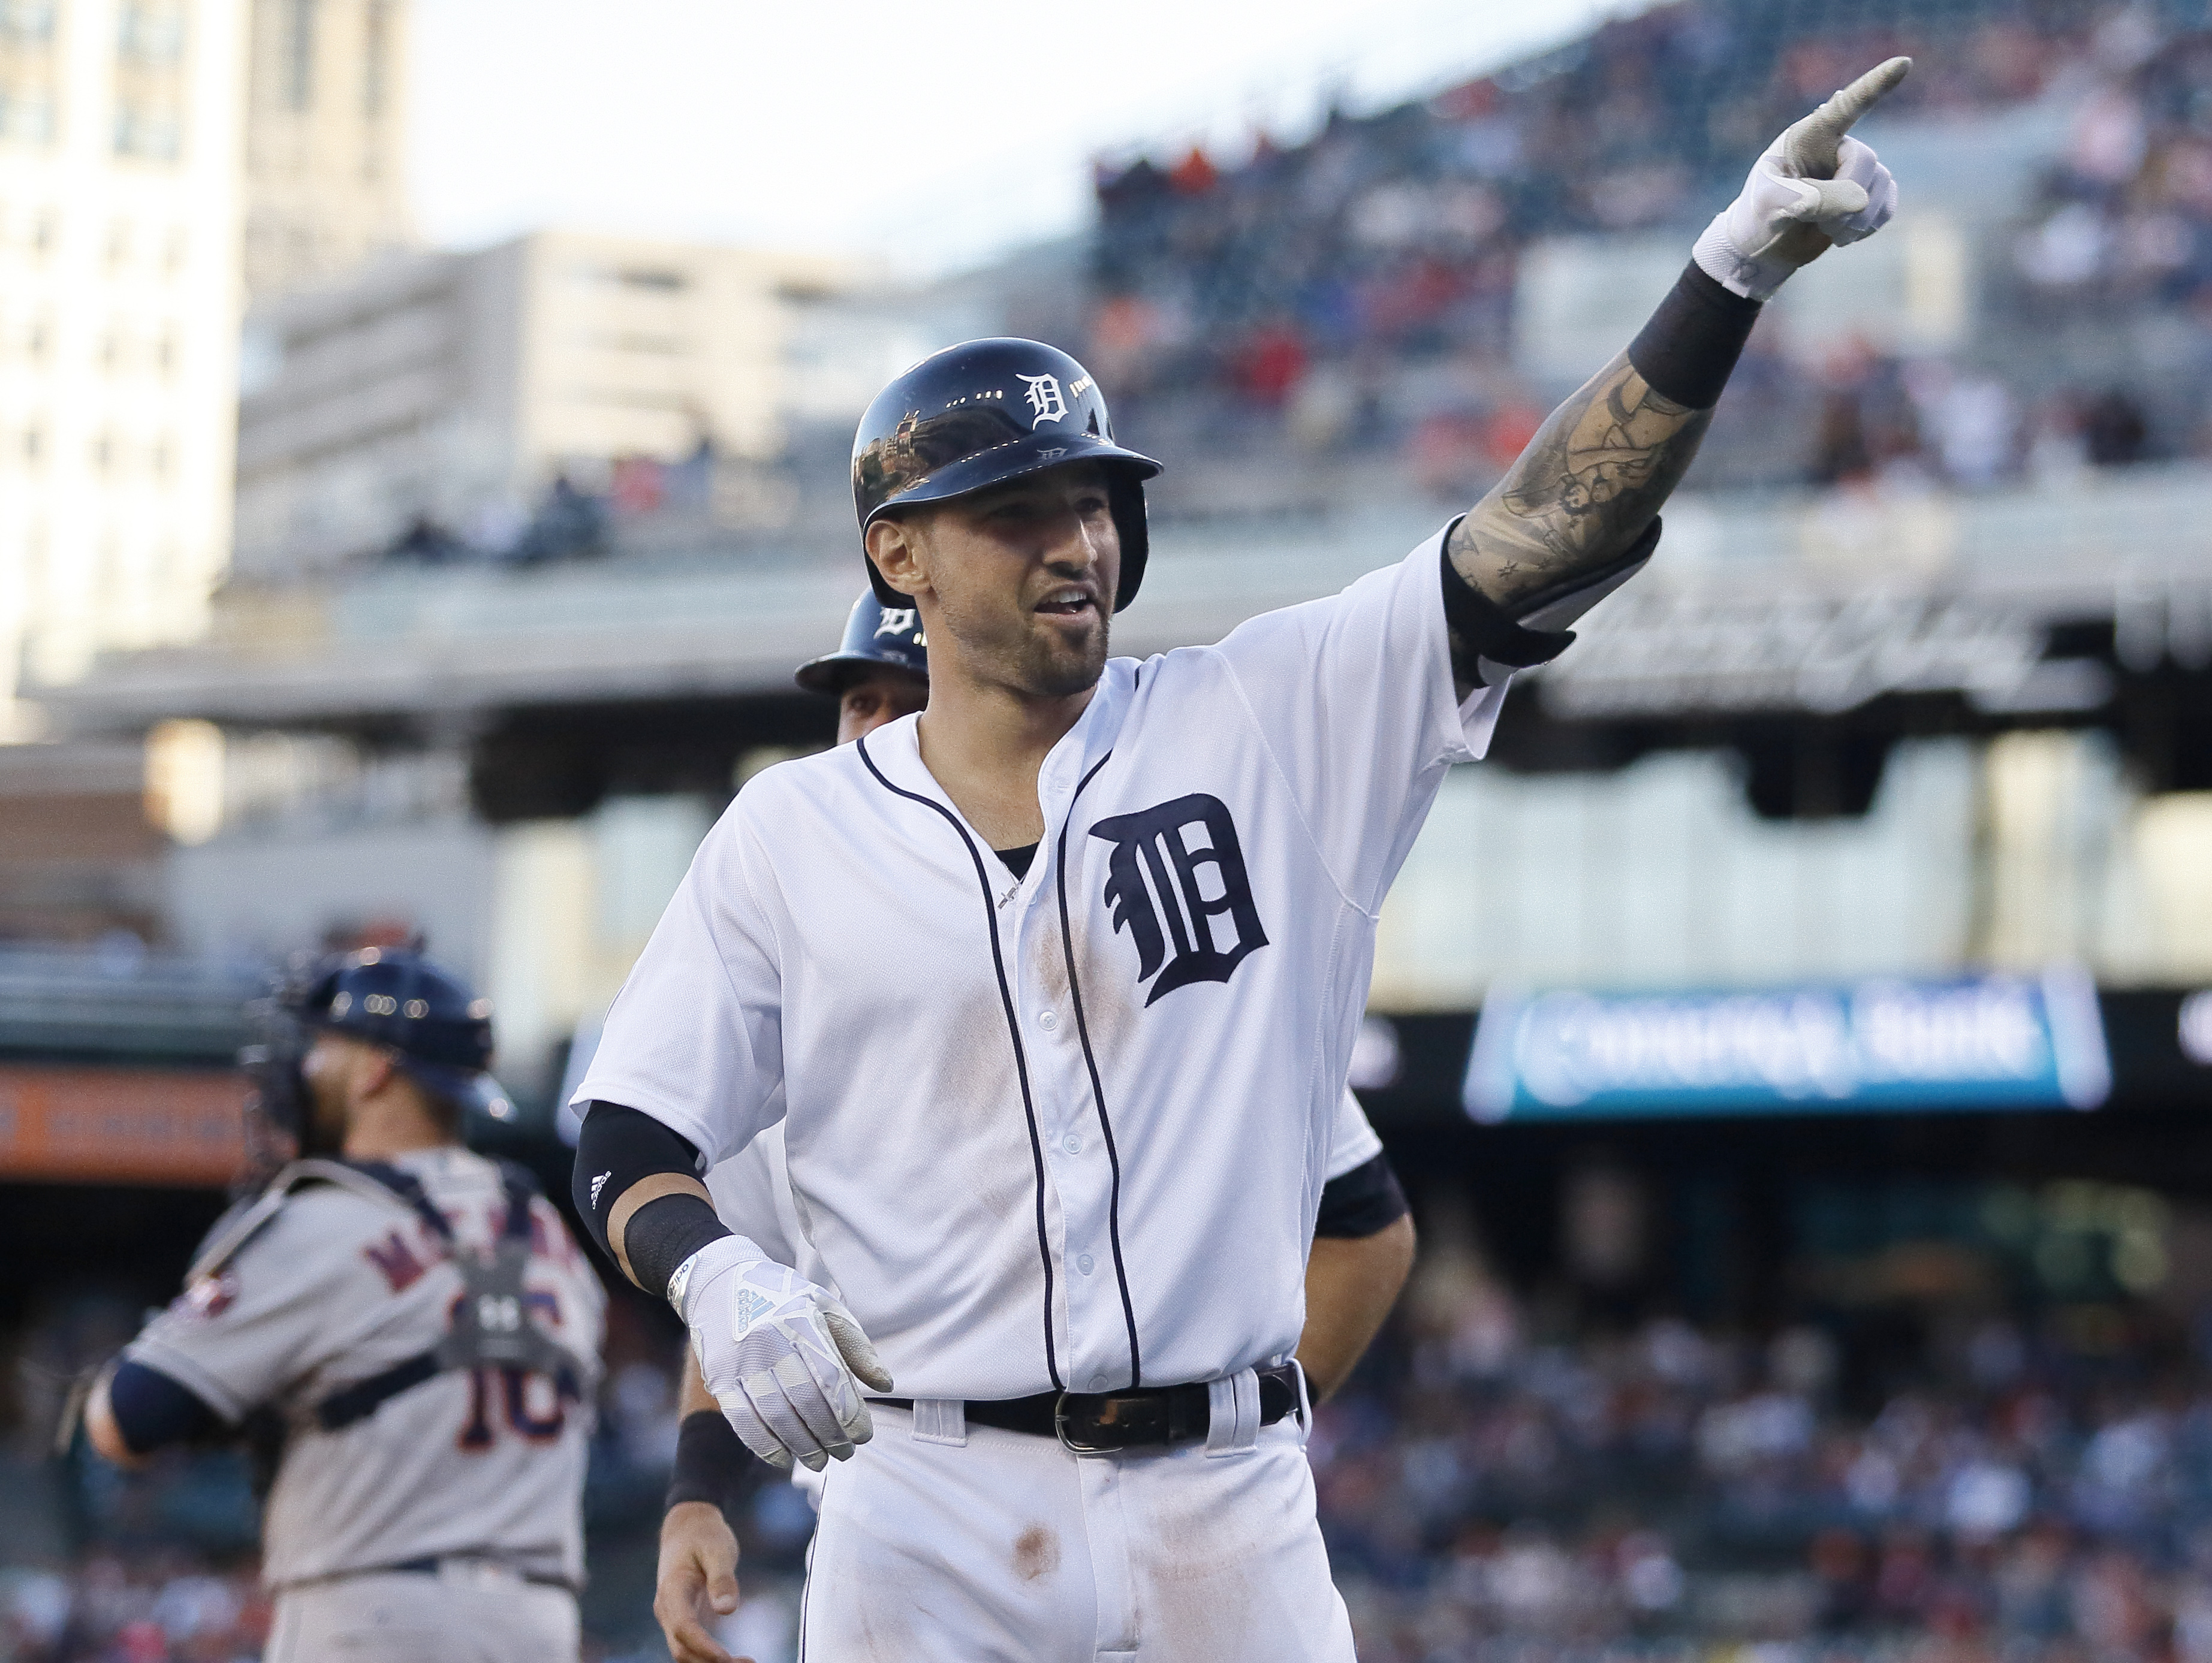 Nick Castellanos: It doesn't surprise me that their were so many